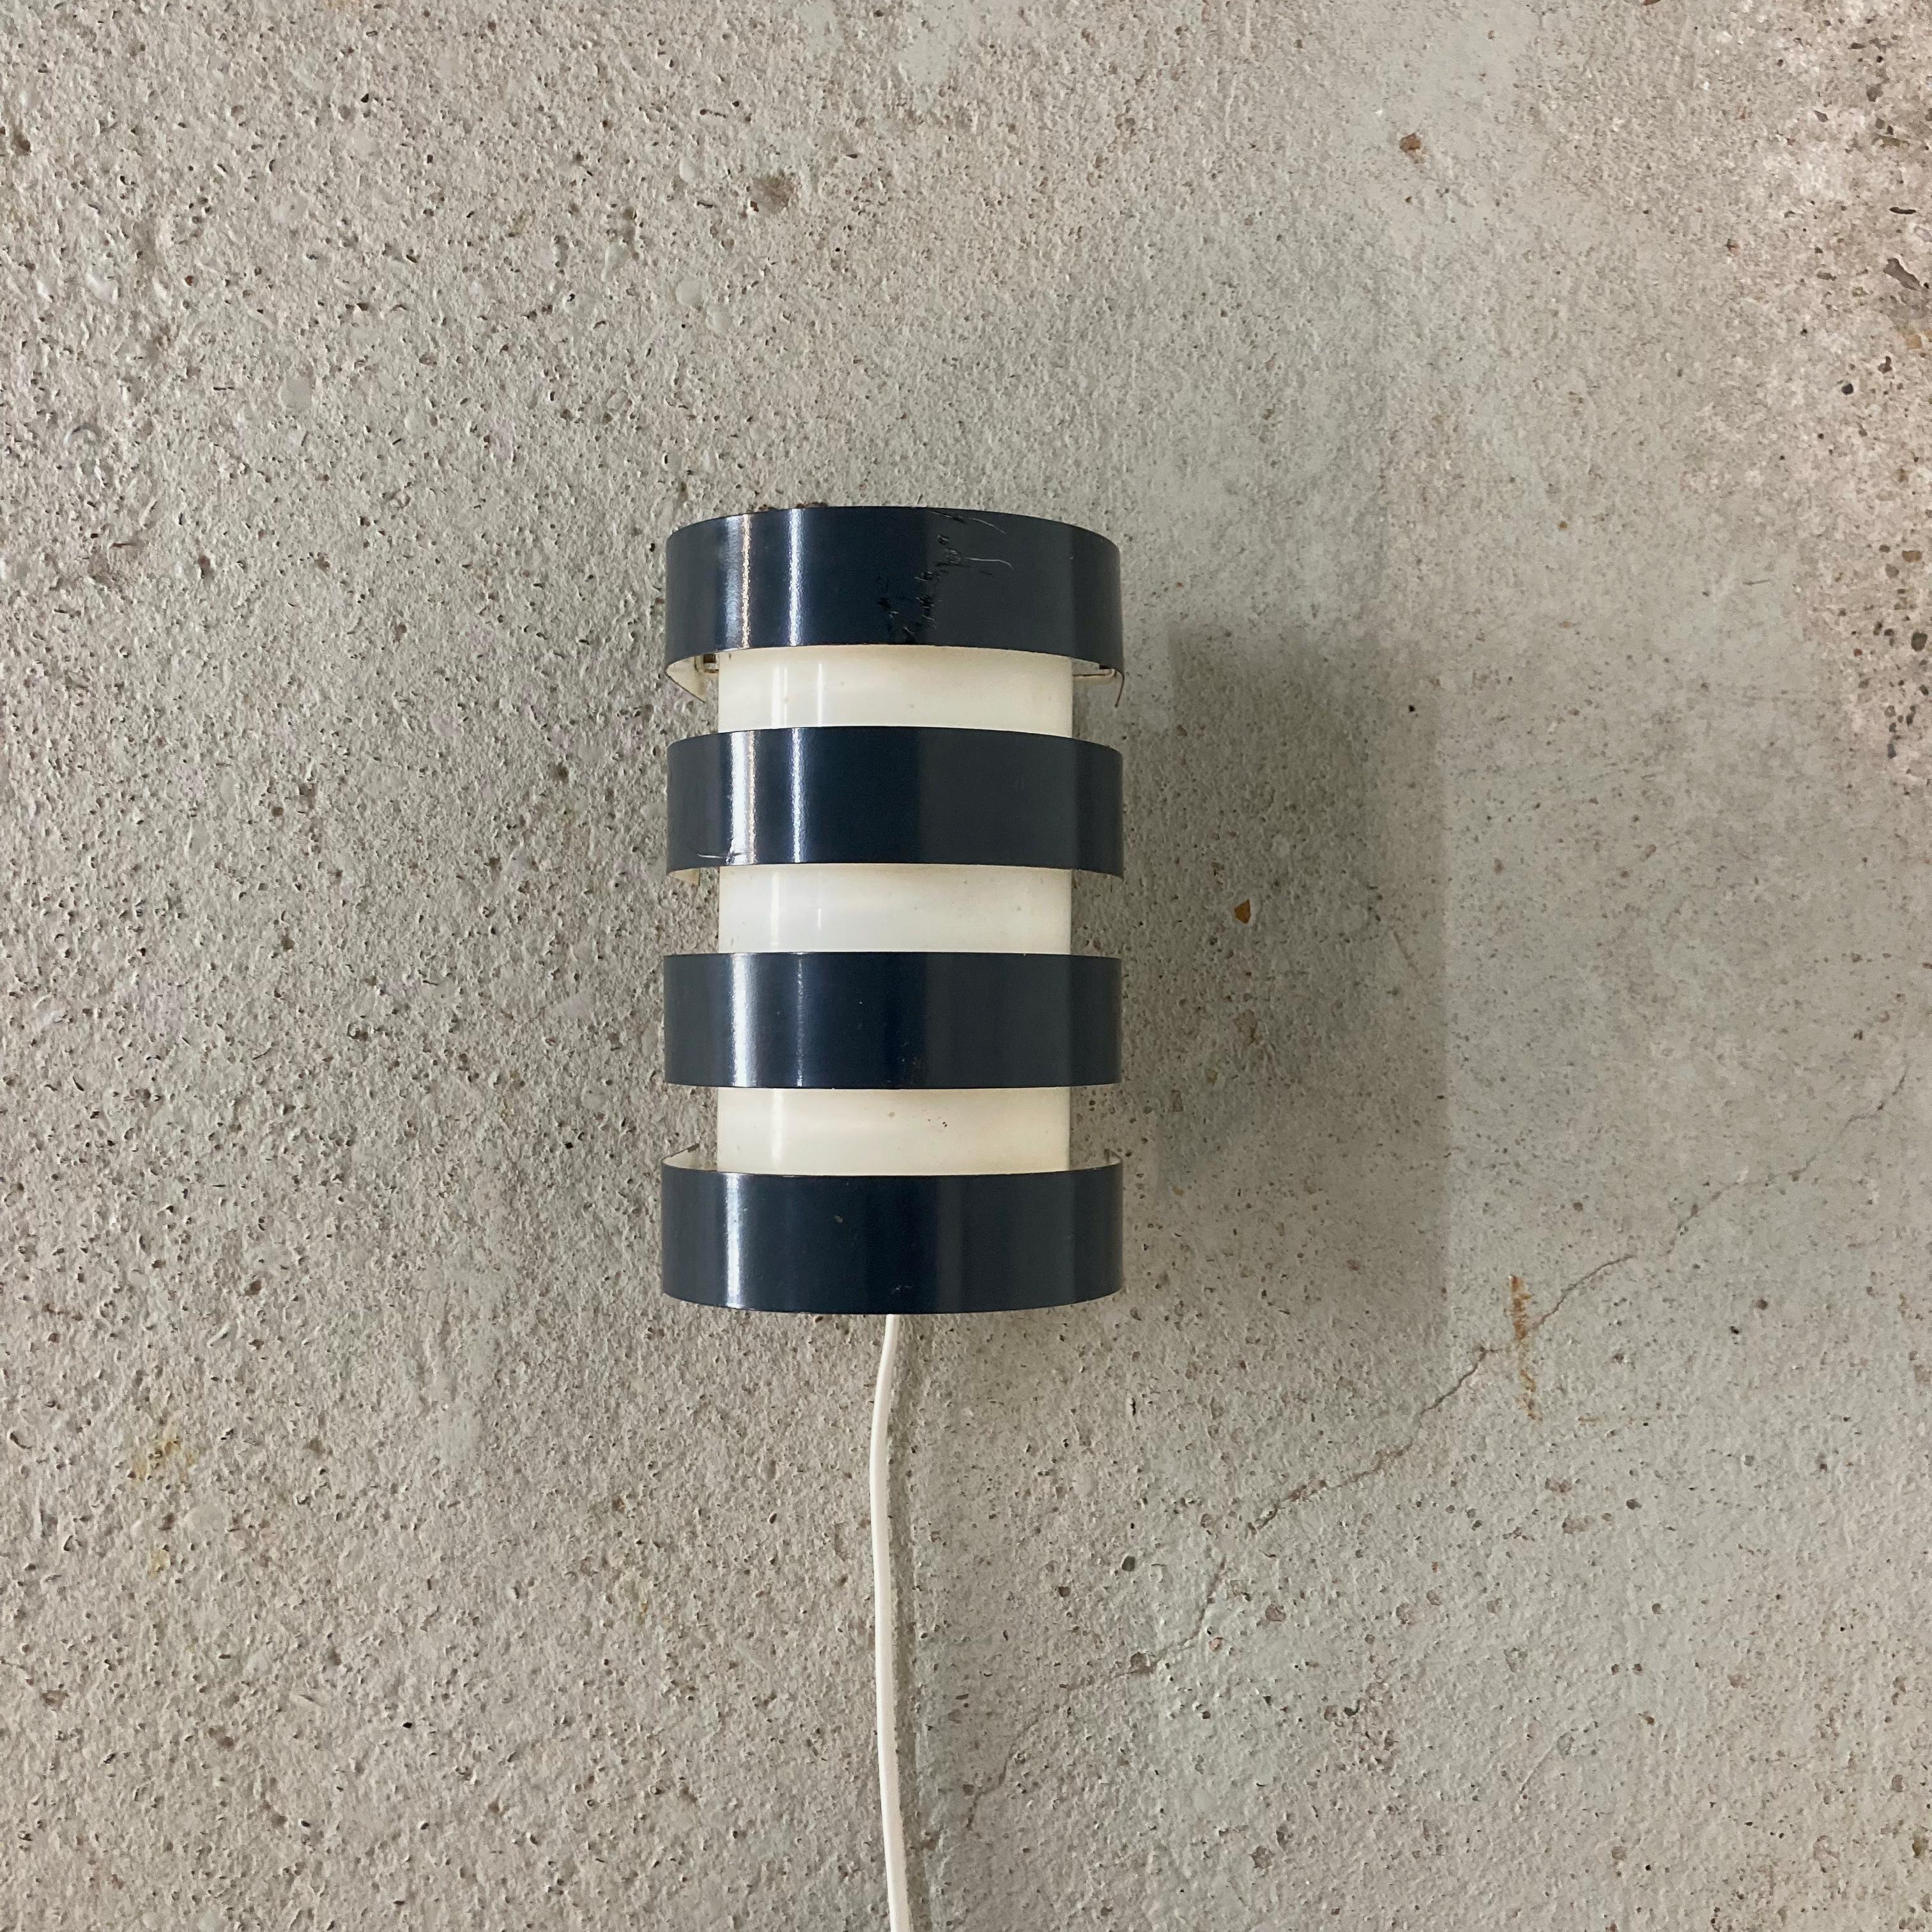 Mid century modern wall light by Itsu.
Made in Finland in the 1950s.
Model AH85.

White and dark blue/gray lacquered metal.

Marked accordingly.

Nice ambient light.

1 x E27 socket. EU plug and switch.